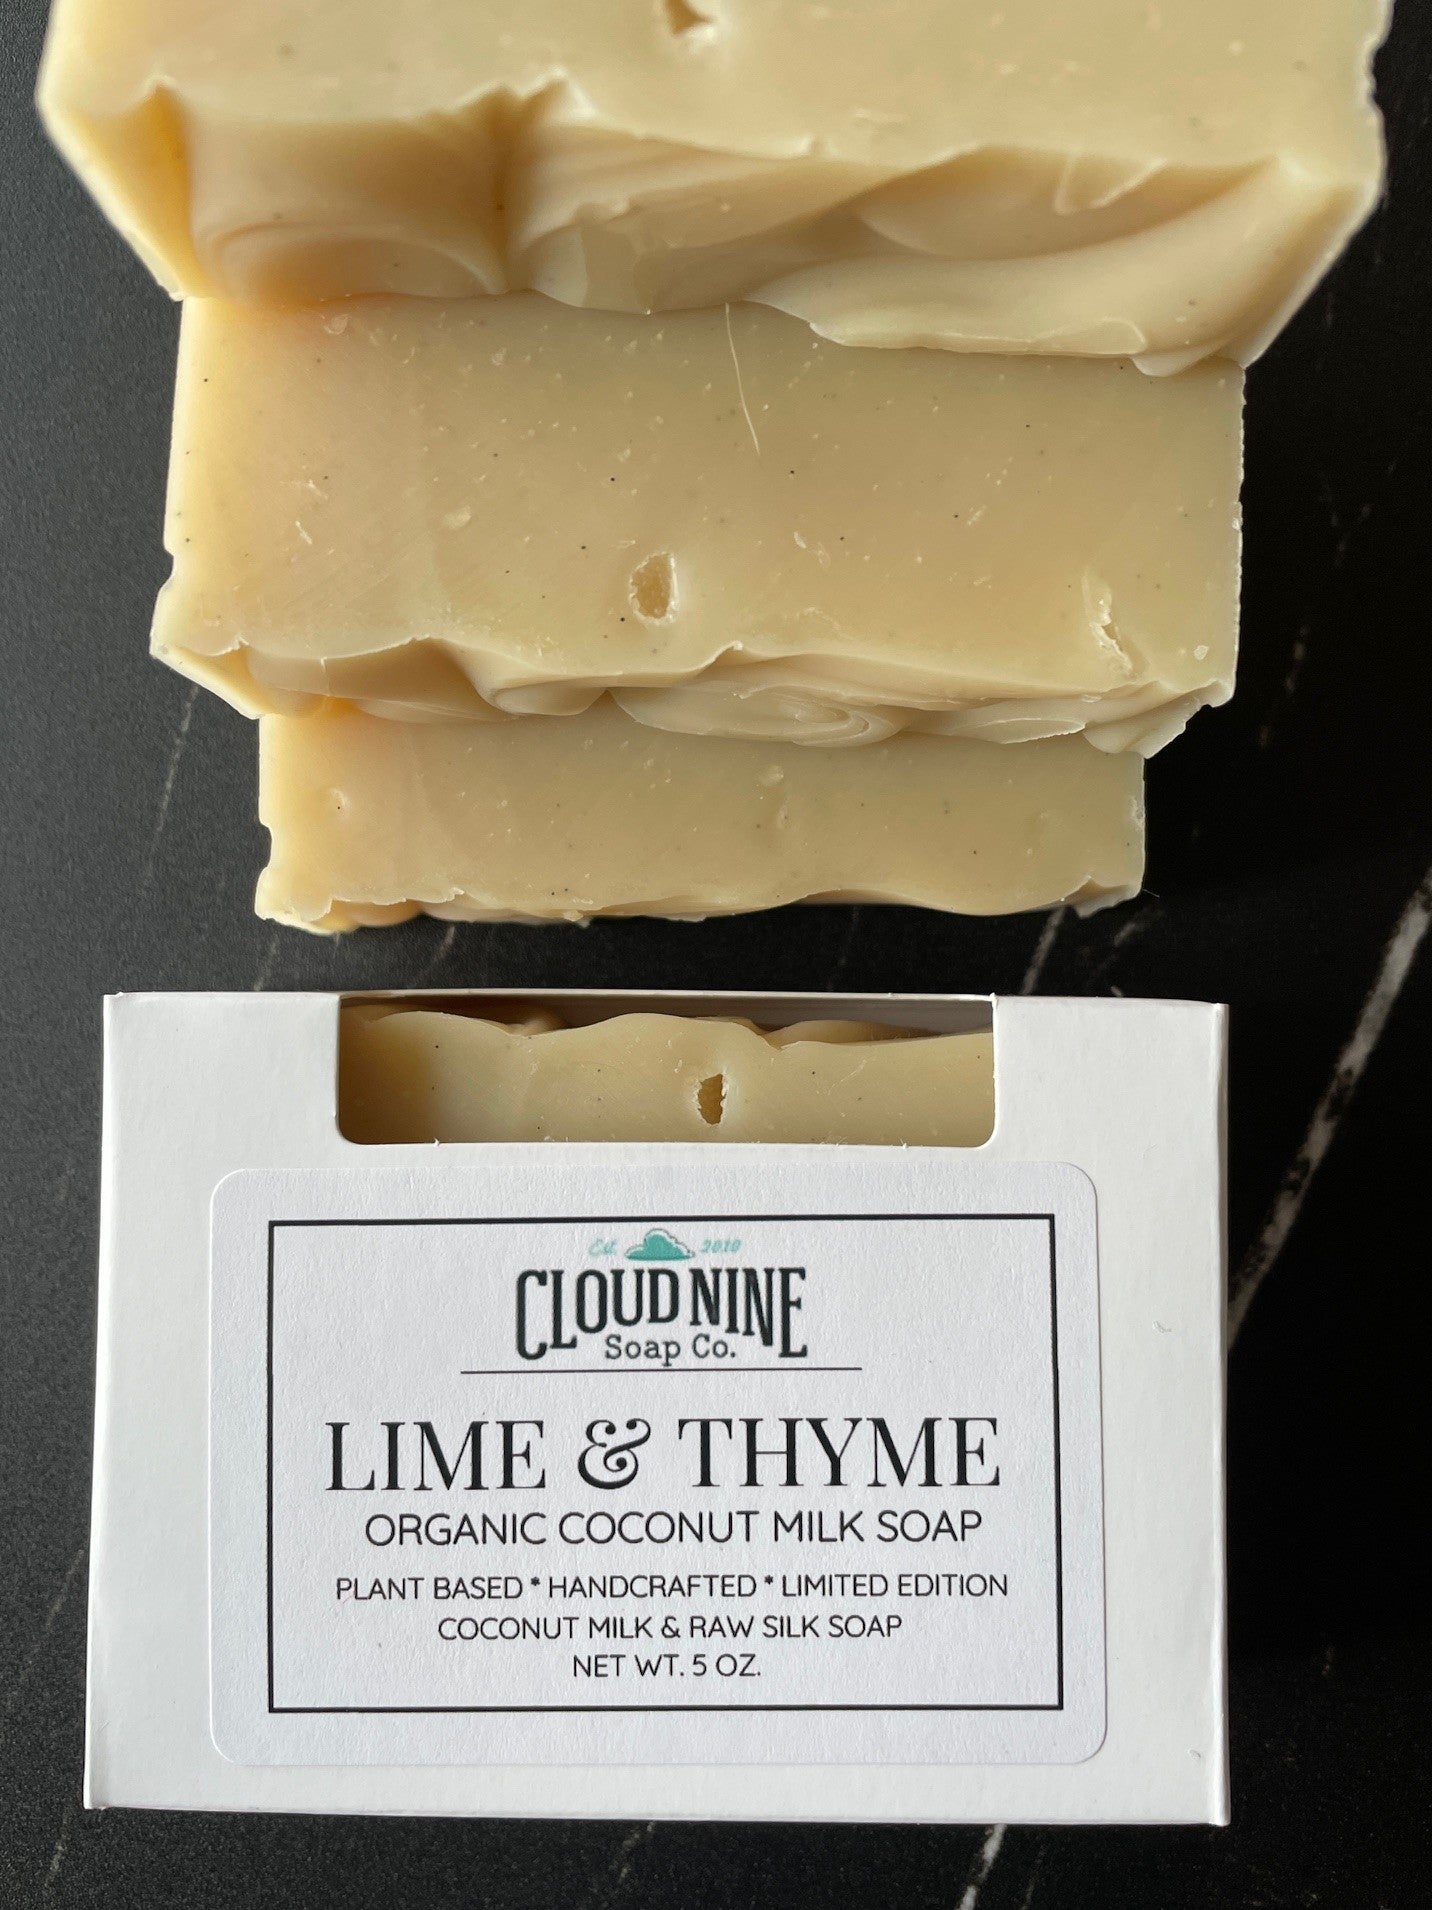 Lime & Thyme Soap: Organic Coconut Milk, Fresh Squeezed Lime, Thyme